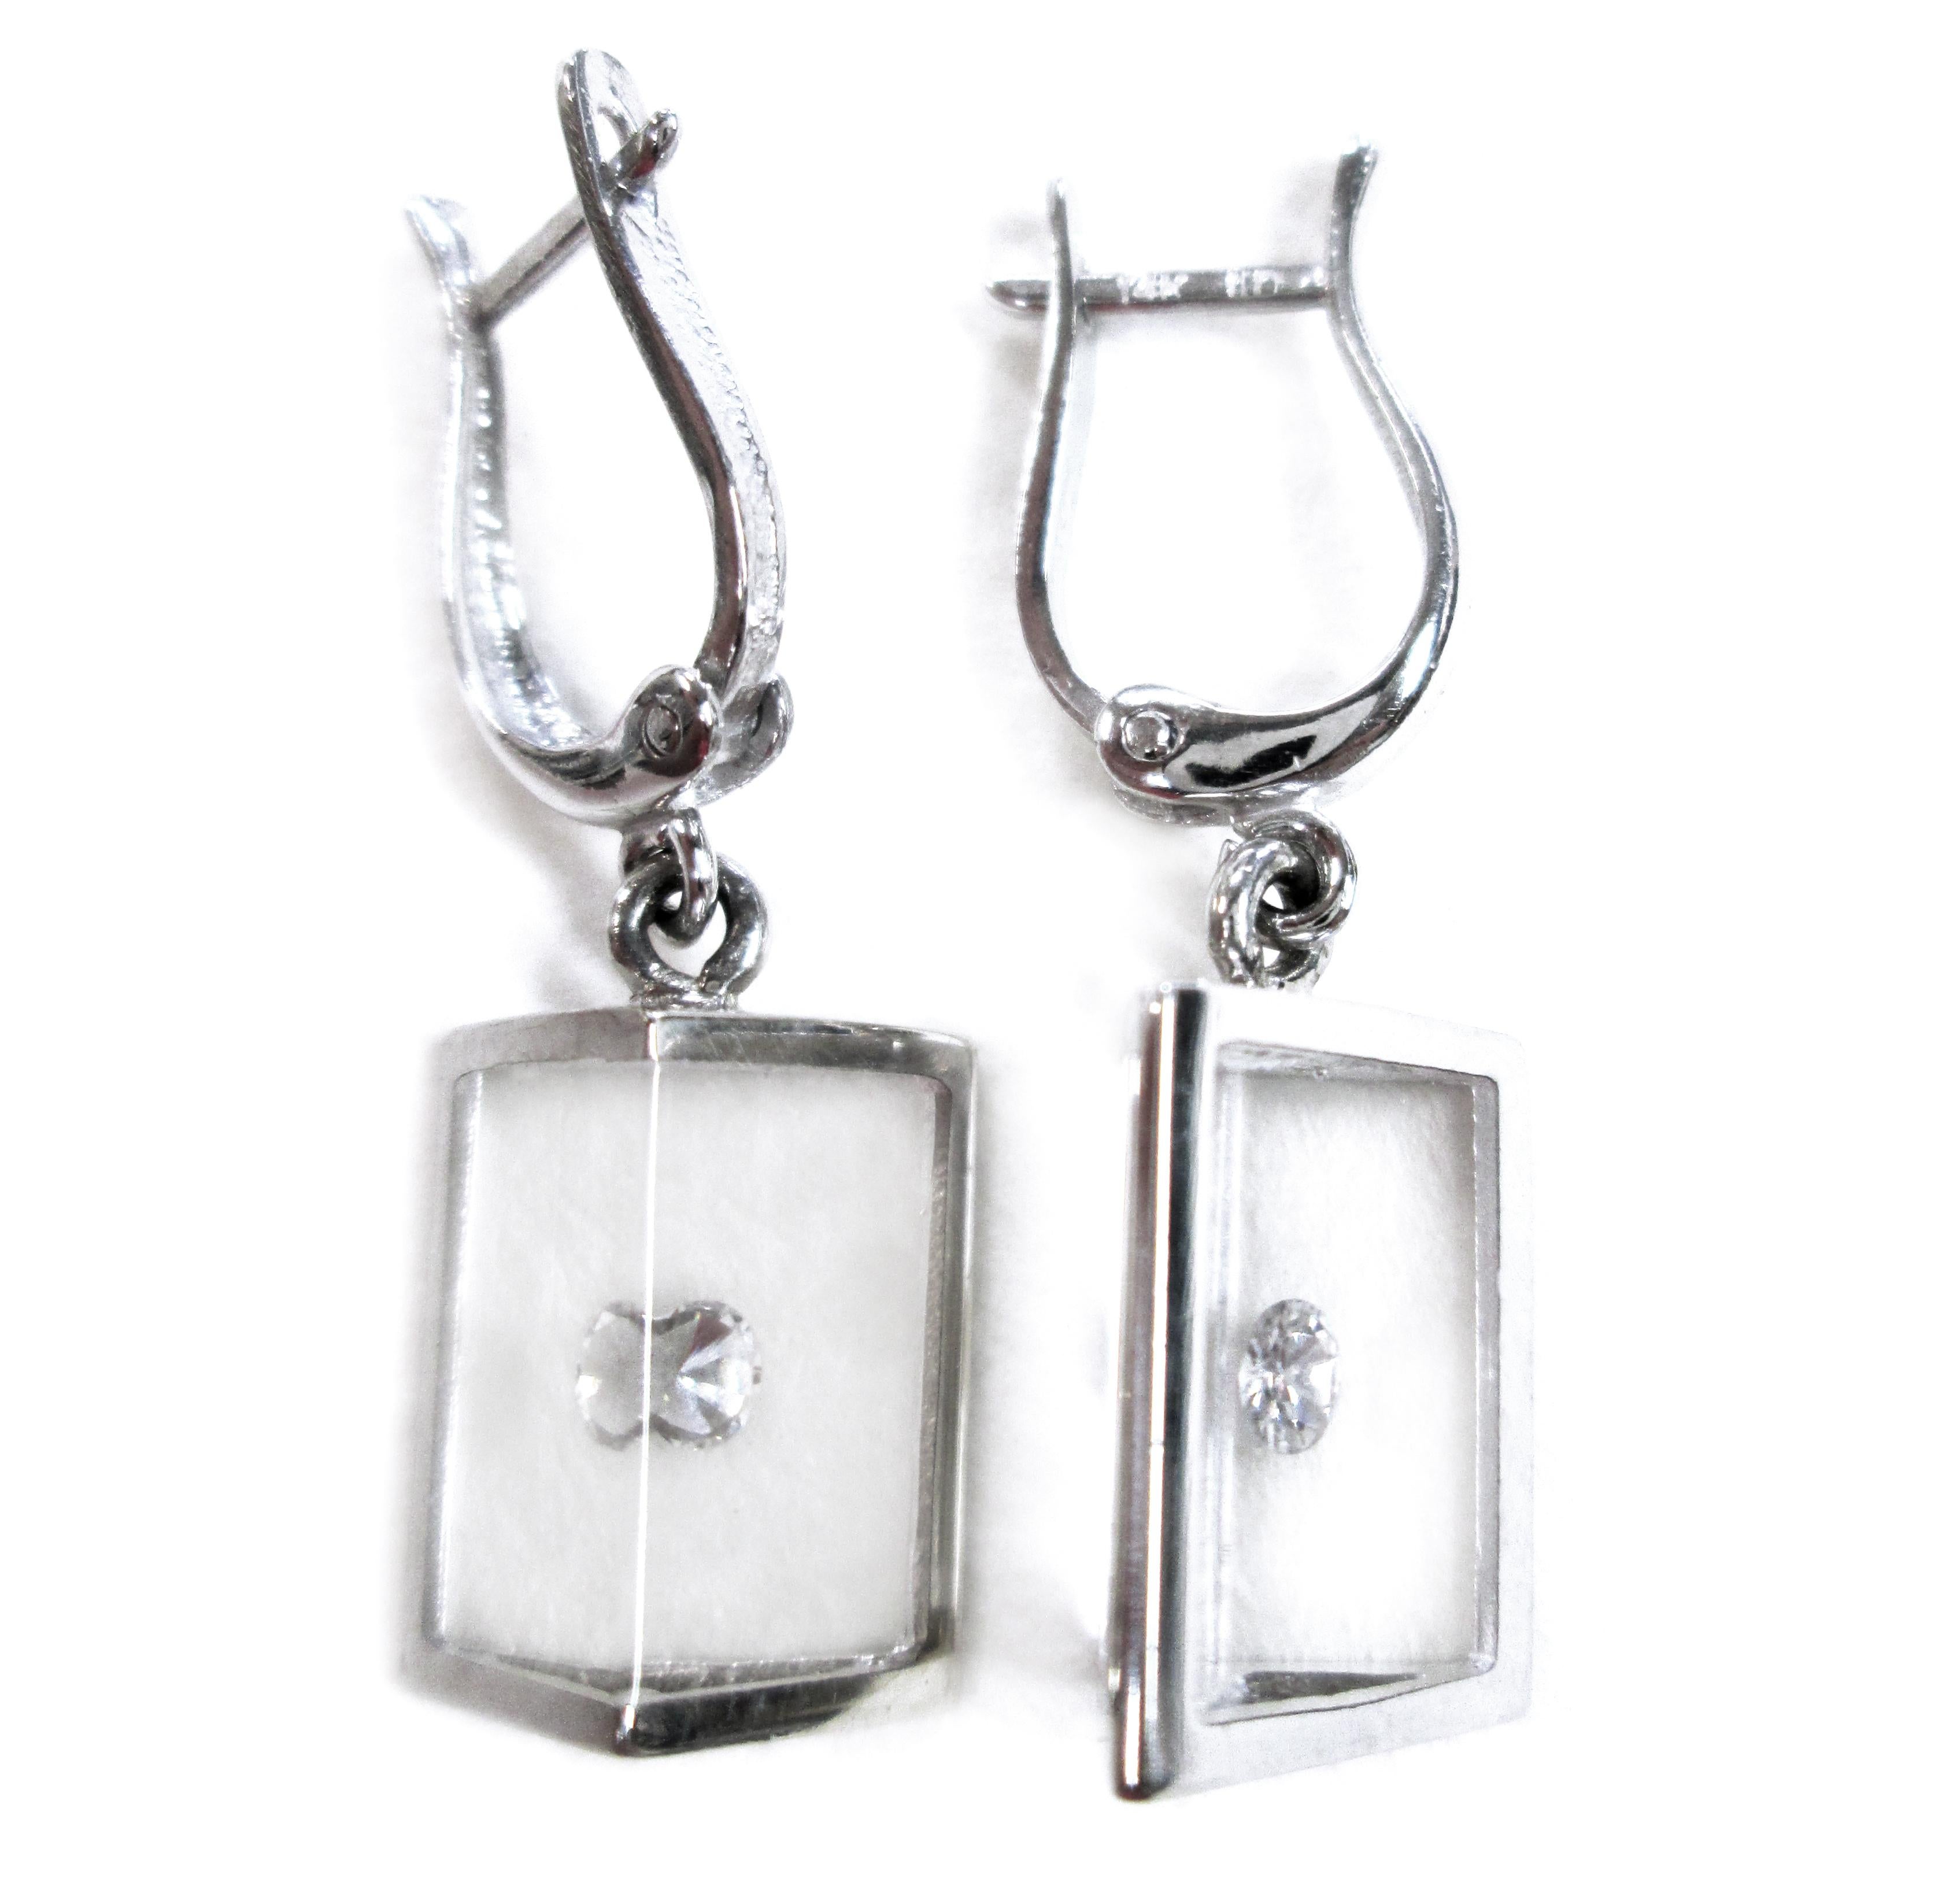 Incogem Floating Diamond Pyramid Earrings: 14k White Gold. The pendant is handcrafted of recycled 14k white gold. A single brilliant-cut diamond in each earring with the reflection creating an optical illusion of multiple diamonds. 0.16ctw. The